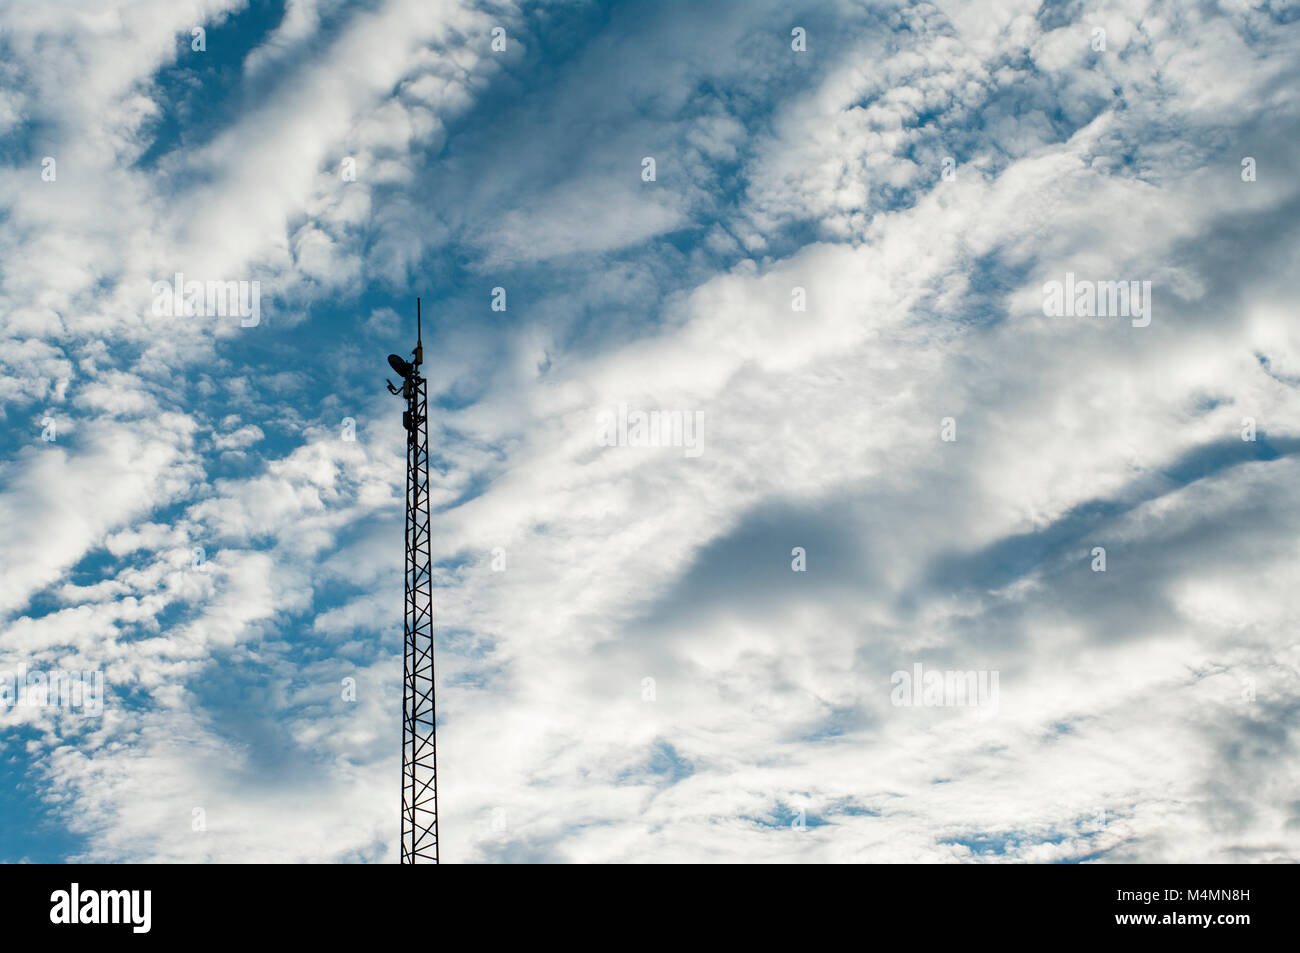 Silhouette of upper part of radio tower against a backdrop of cirrus clouds in blue sky Stock Photo